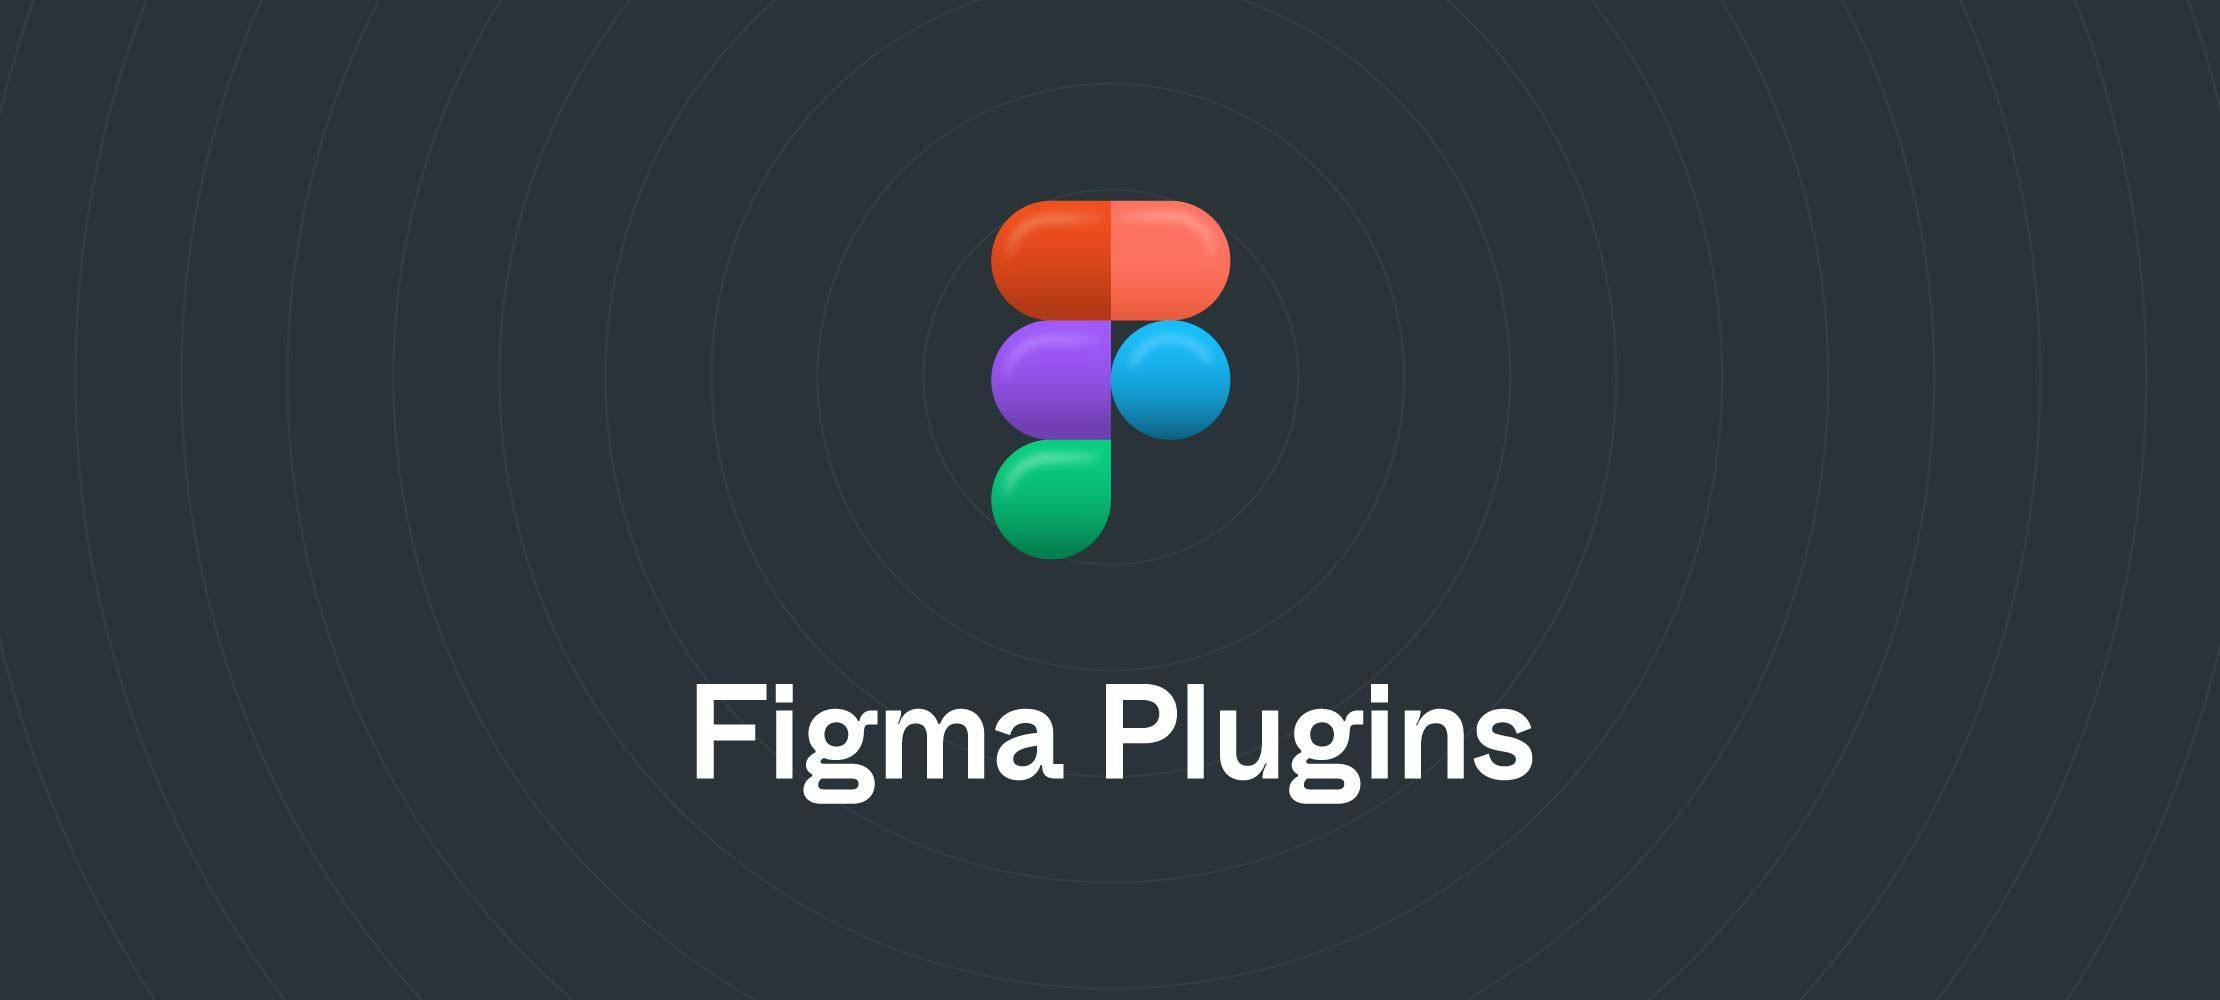 featured image - Devised for Design: Top FIGMA Plugins